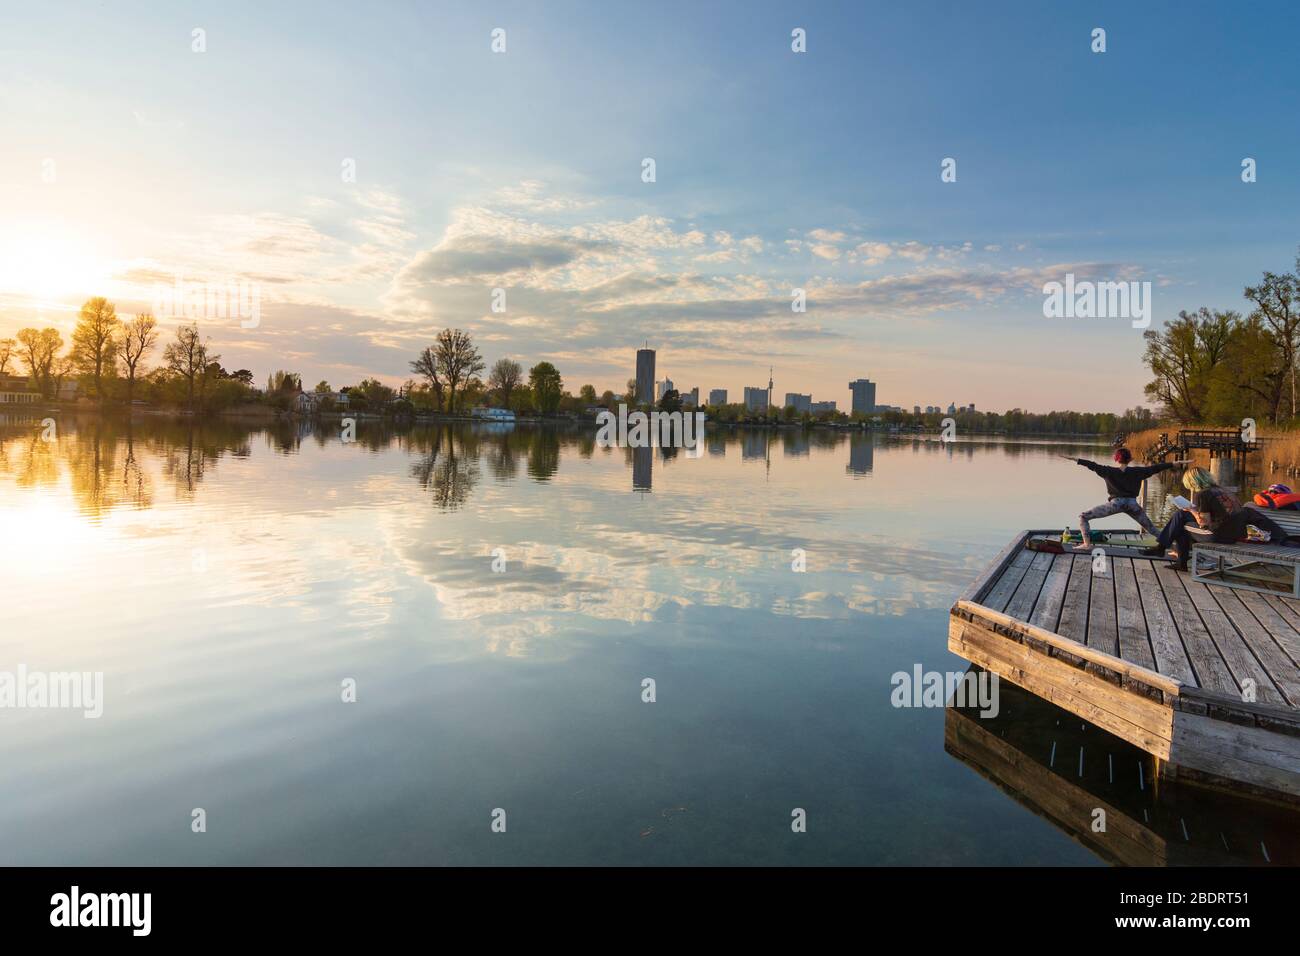 Wien, Vienna: people doing yoga and sitting at benches at wooden platforms at river Alte Donau (Old Danube) at sunset, in 22. Donaustadt, Wien, Austri Stock Photo